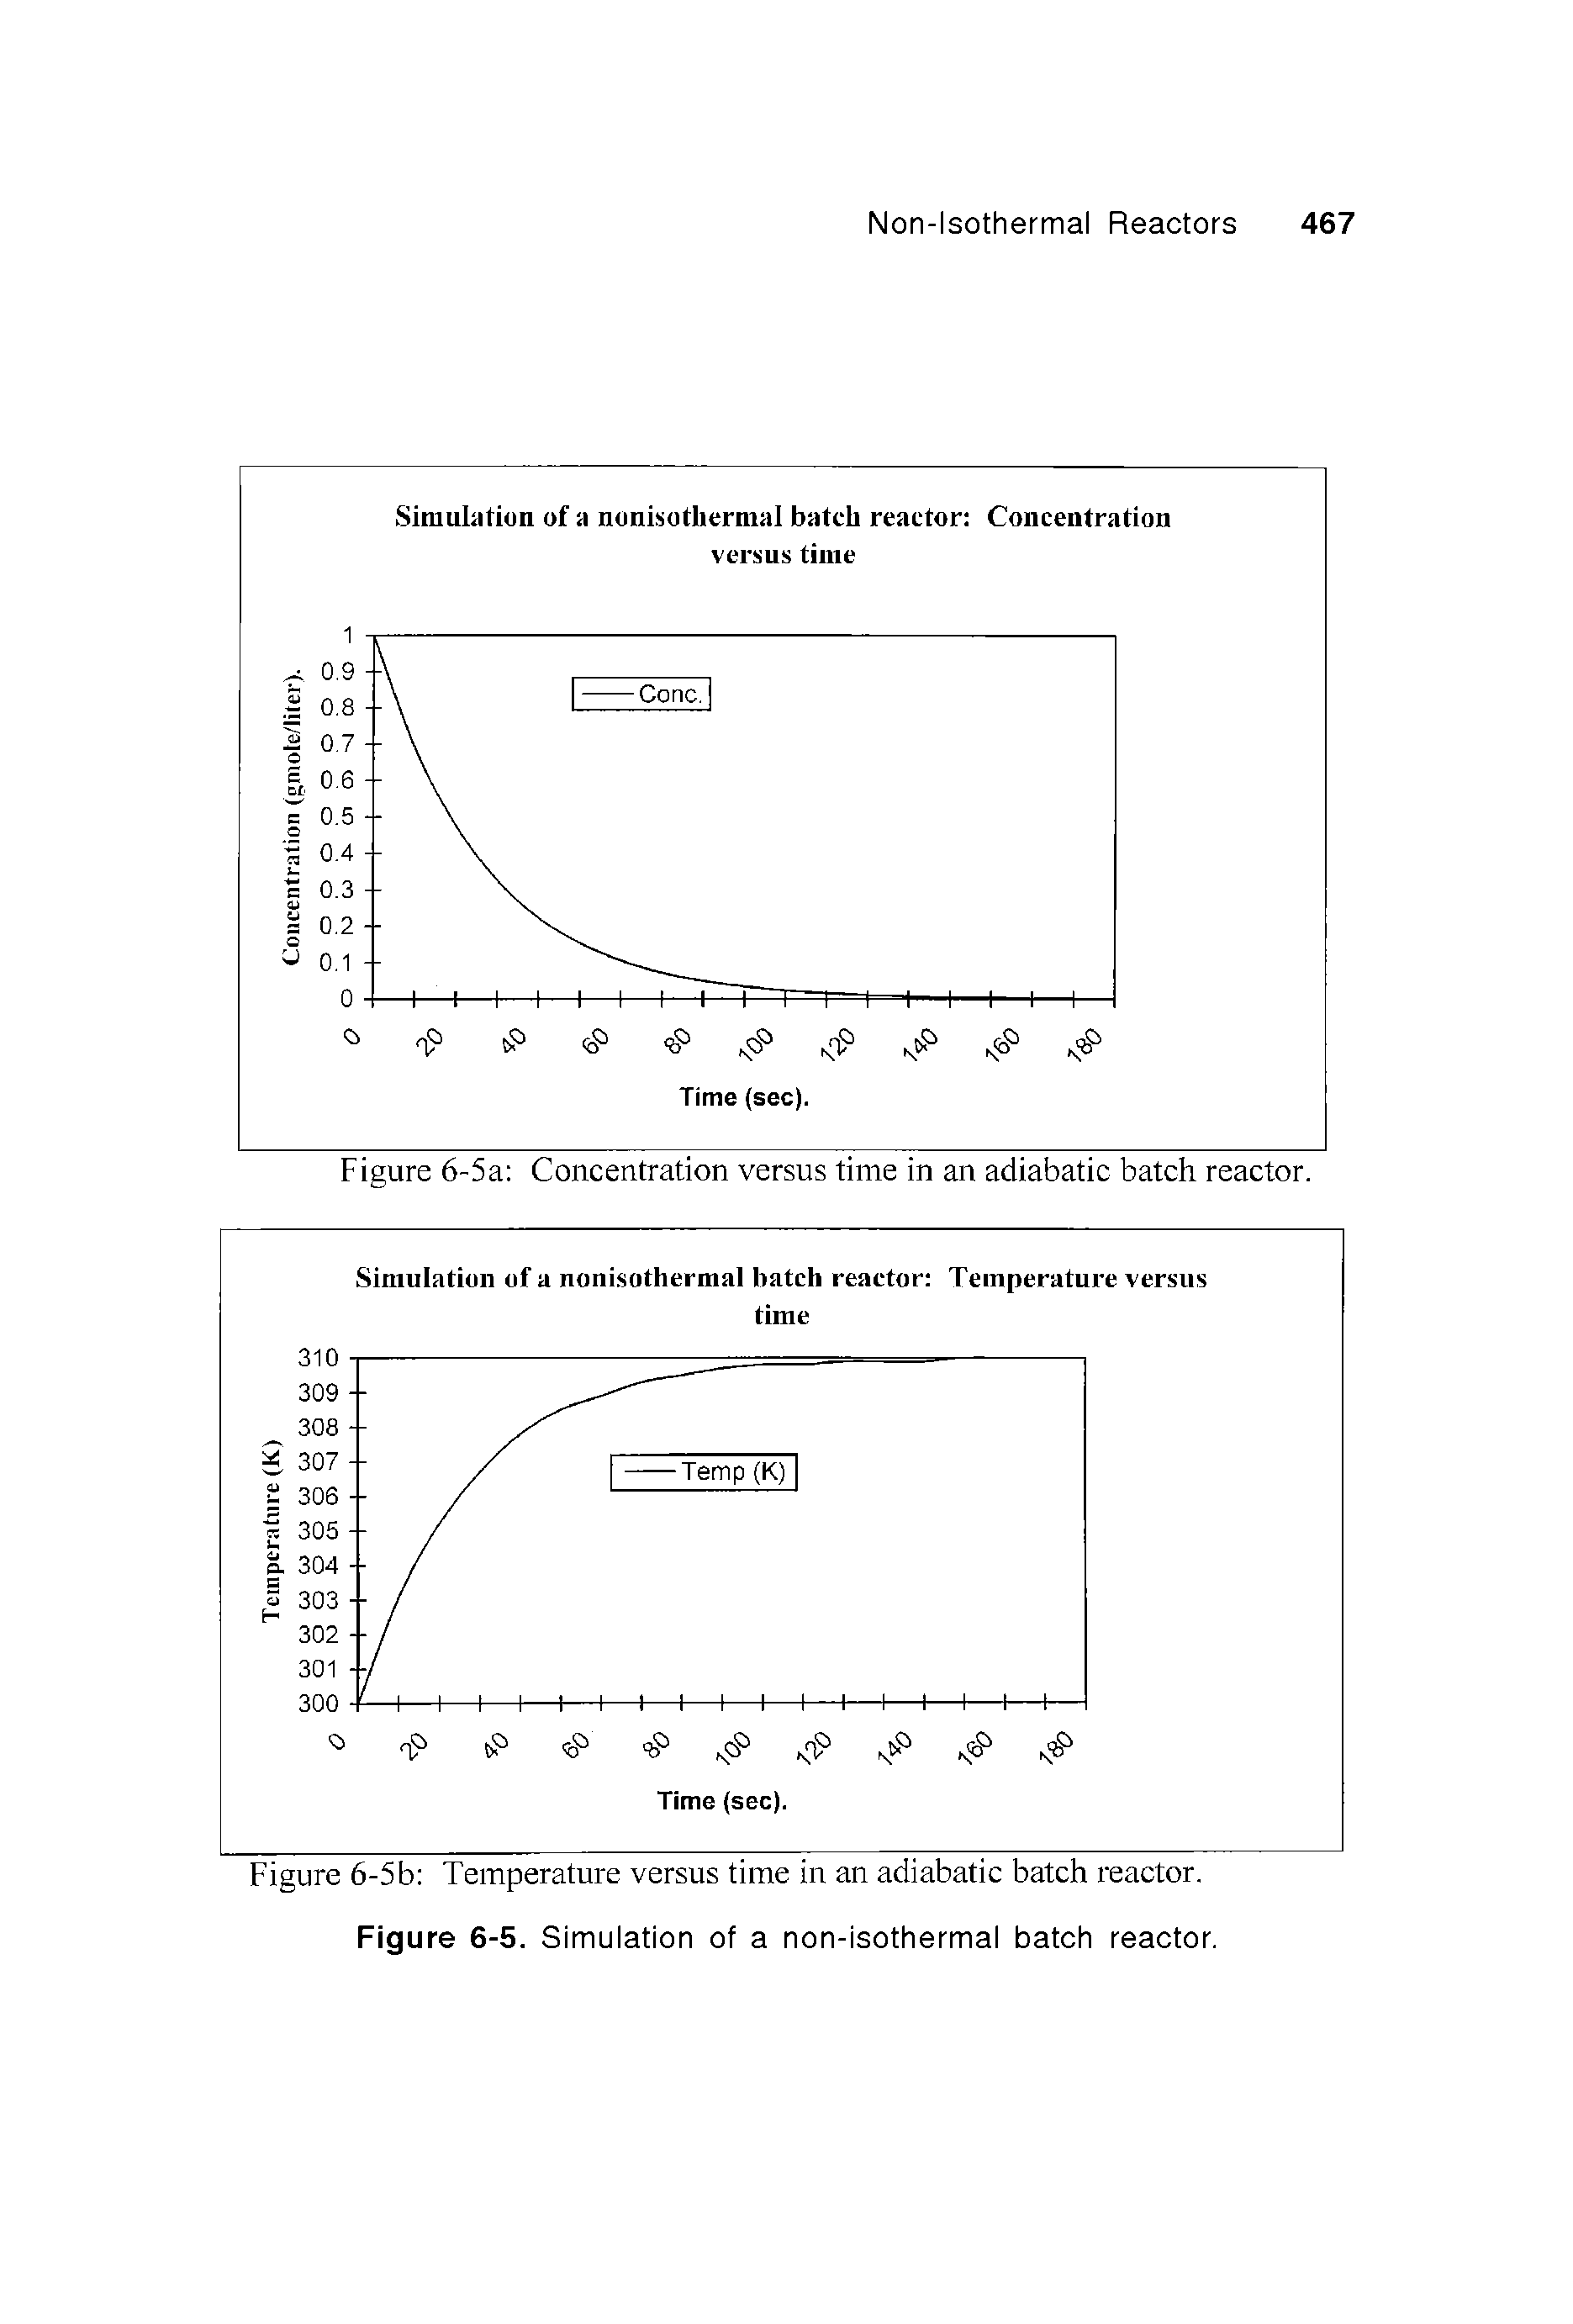 Figure 6-5b Temperature versus time in an adiabatic batch reactor. Fig ure 6-5. Simulation of a non-isothermal batch reactor.